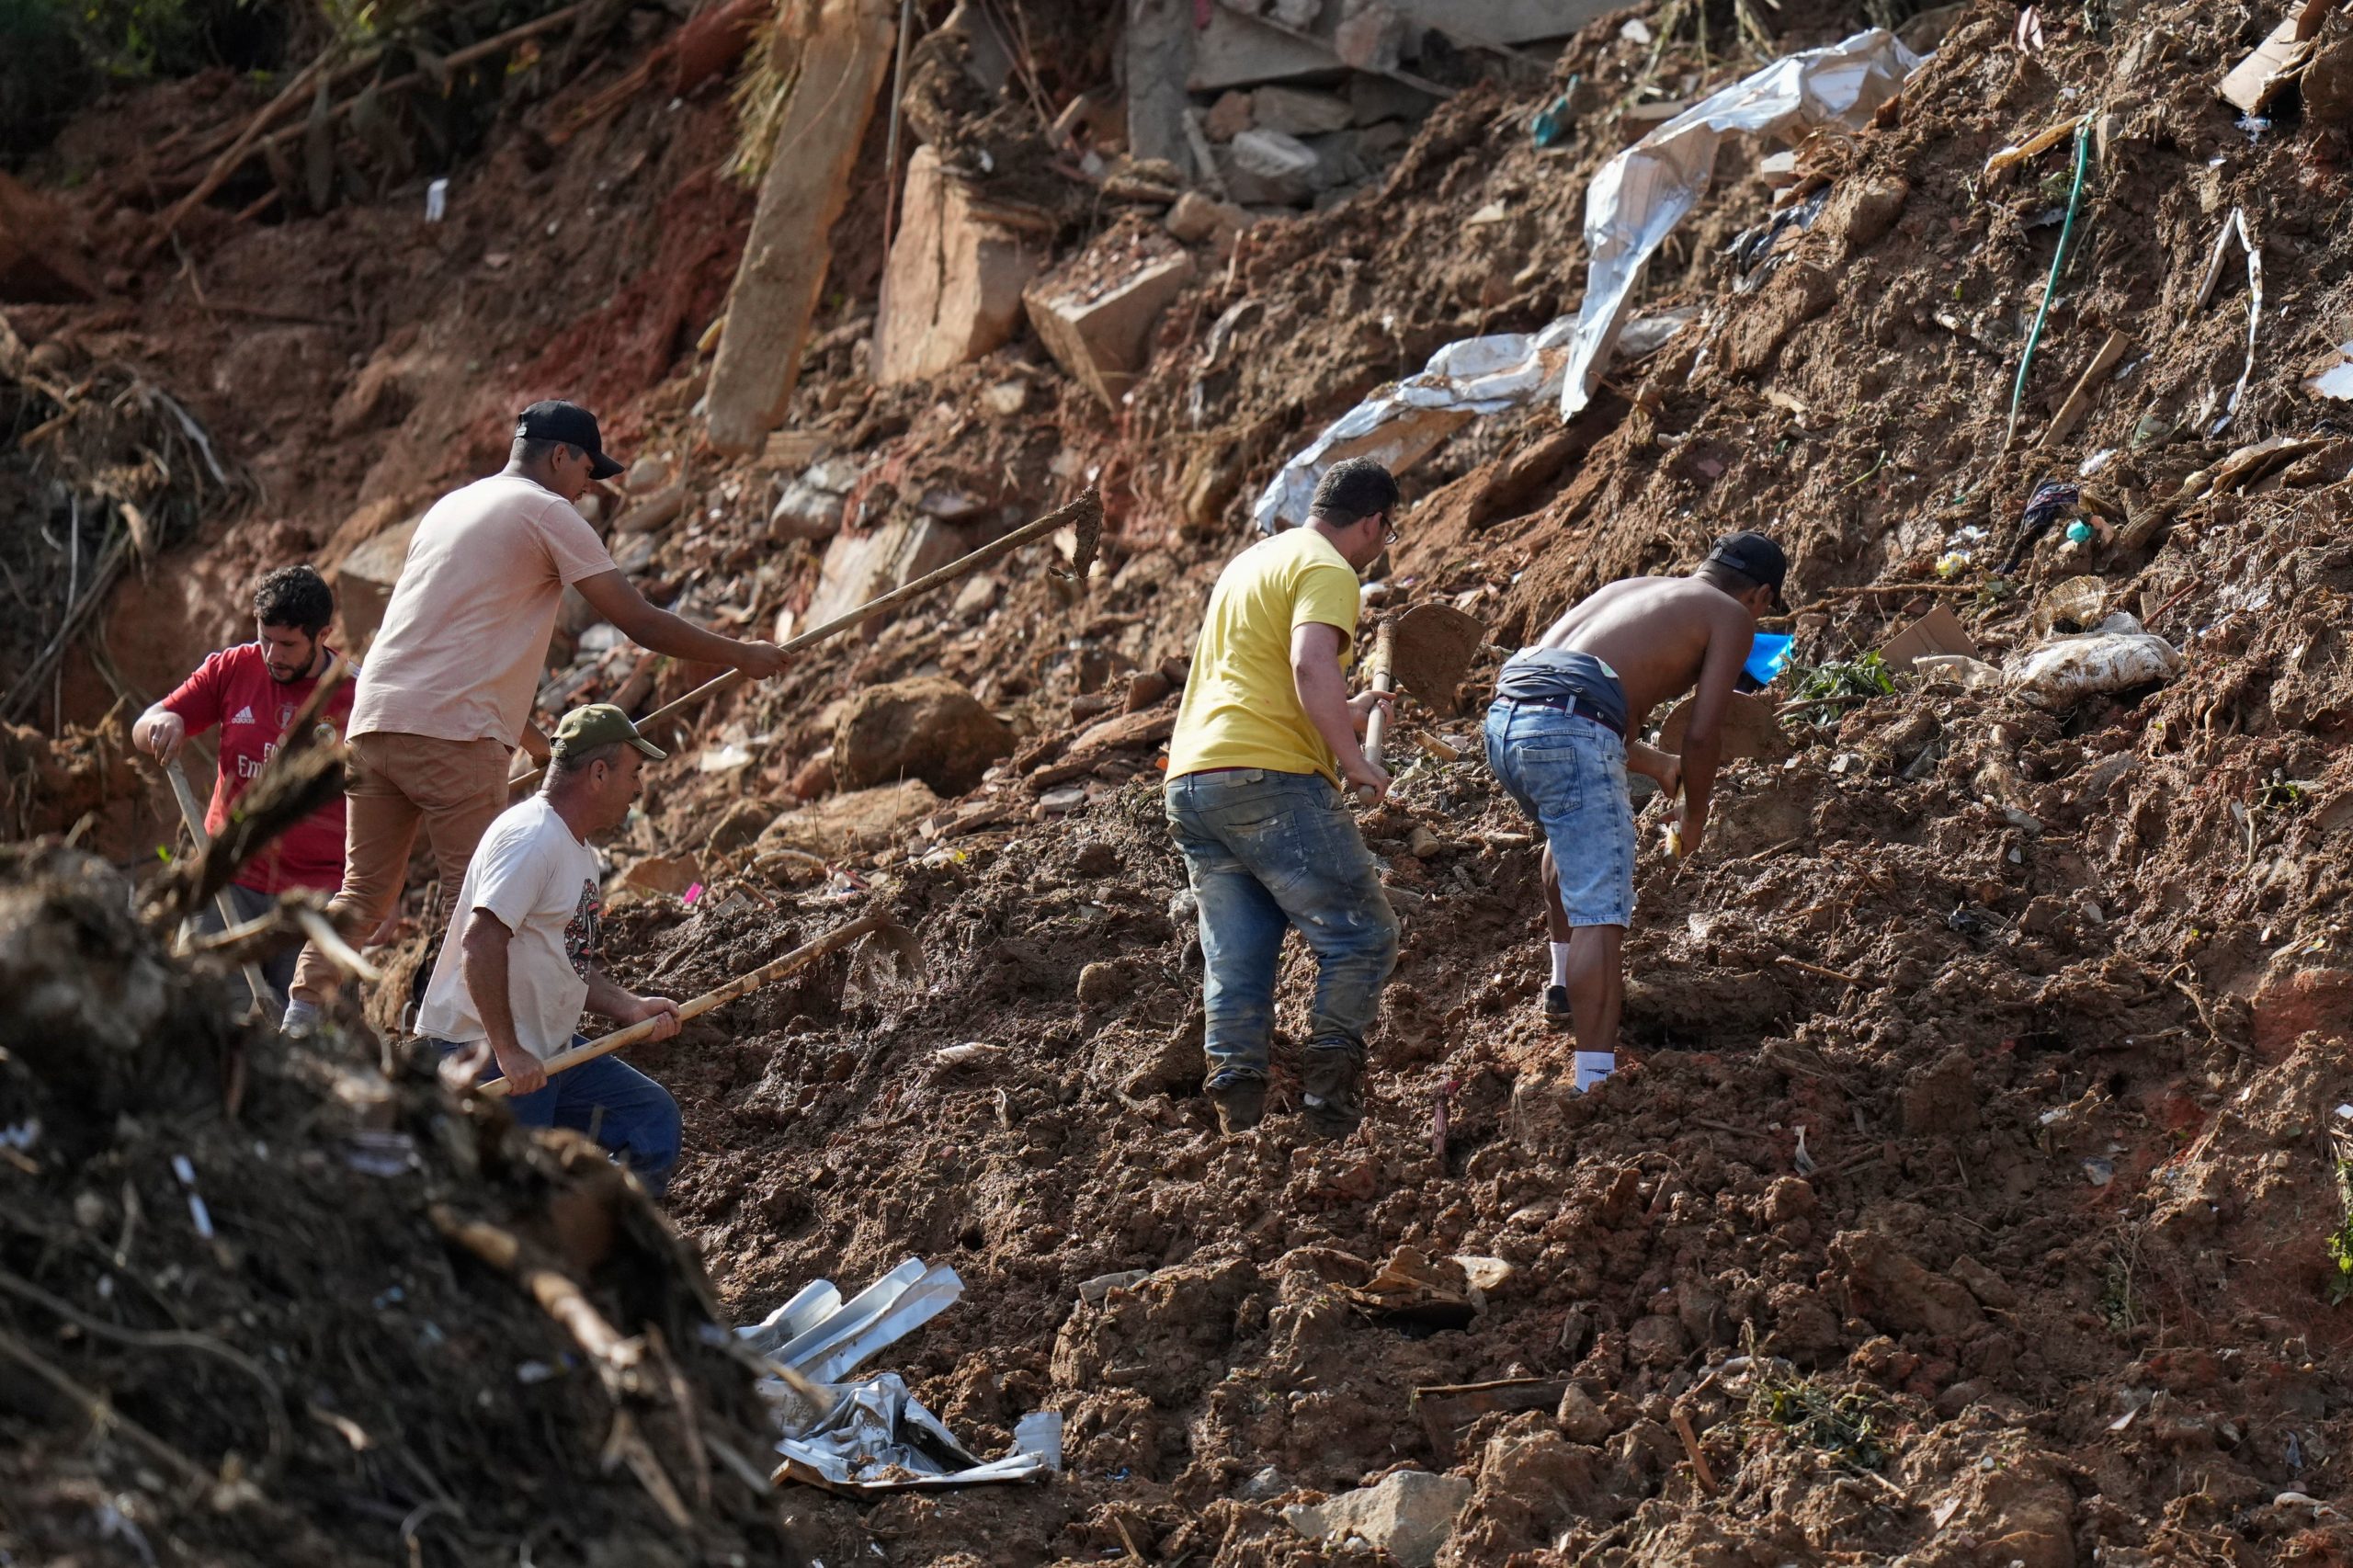 Residents search for survivors on the second day of rescue efforts. (Photo: Silvia Izquierdo, AP)